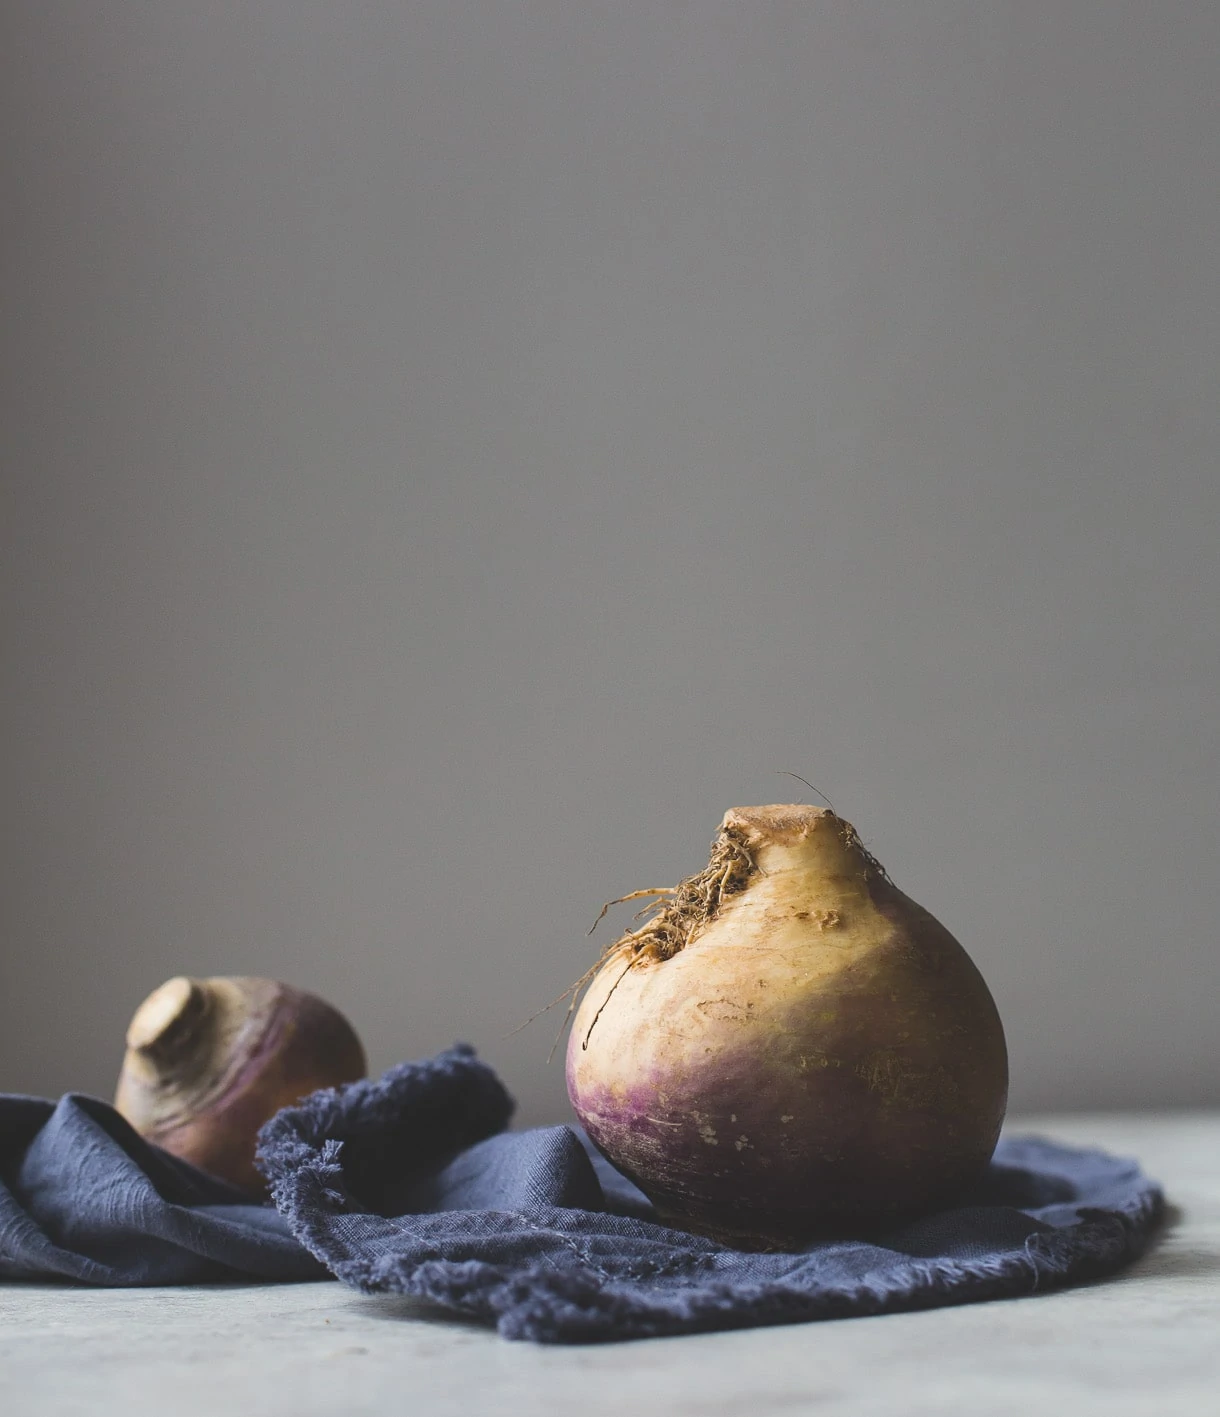 What to make with rutabaga and how to cook it